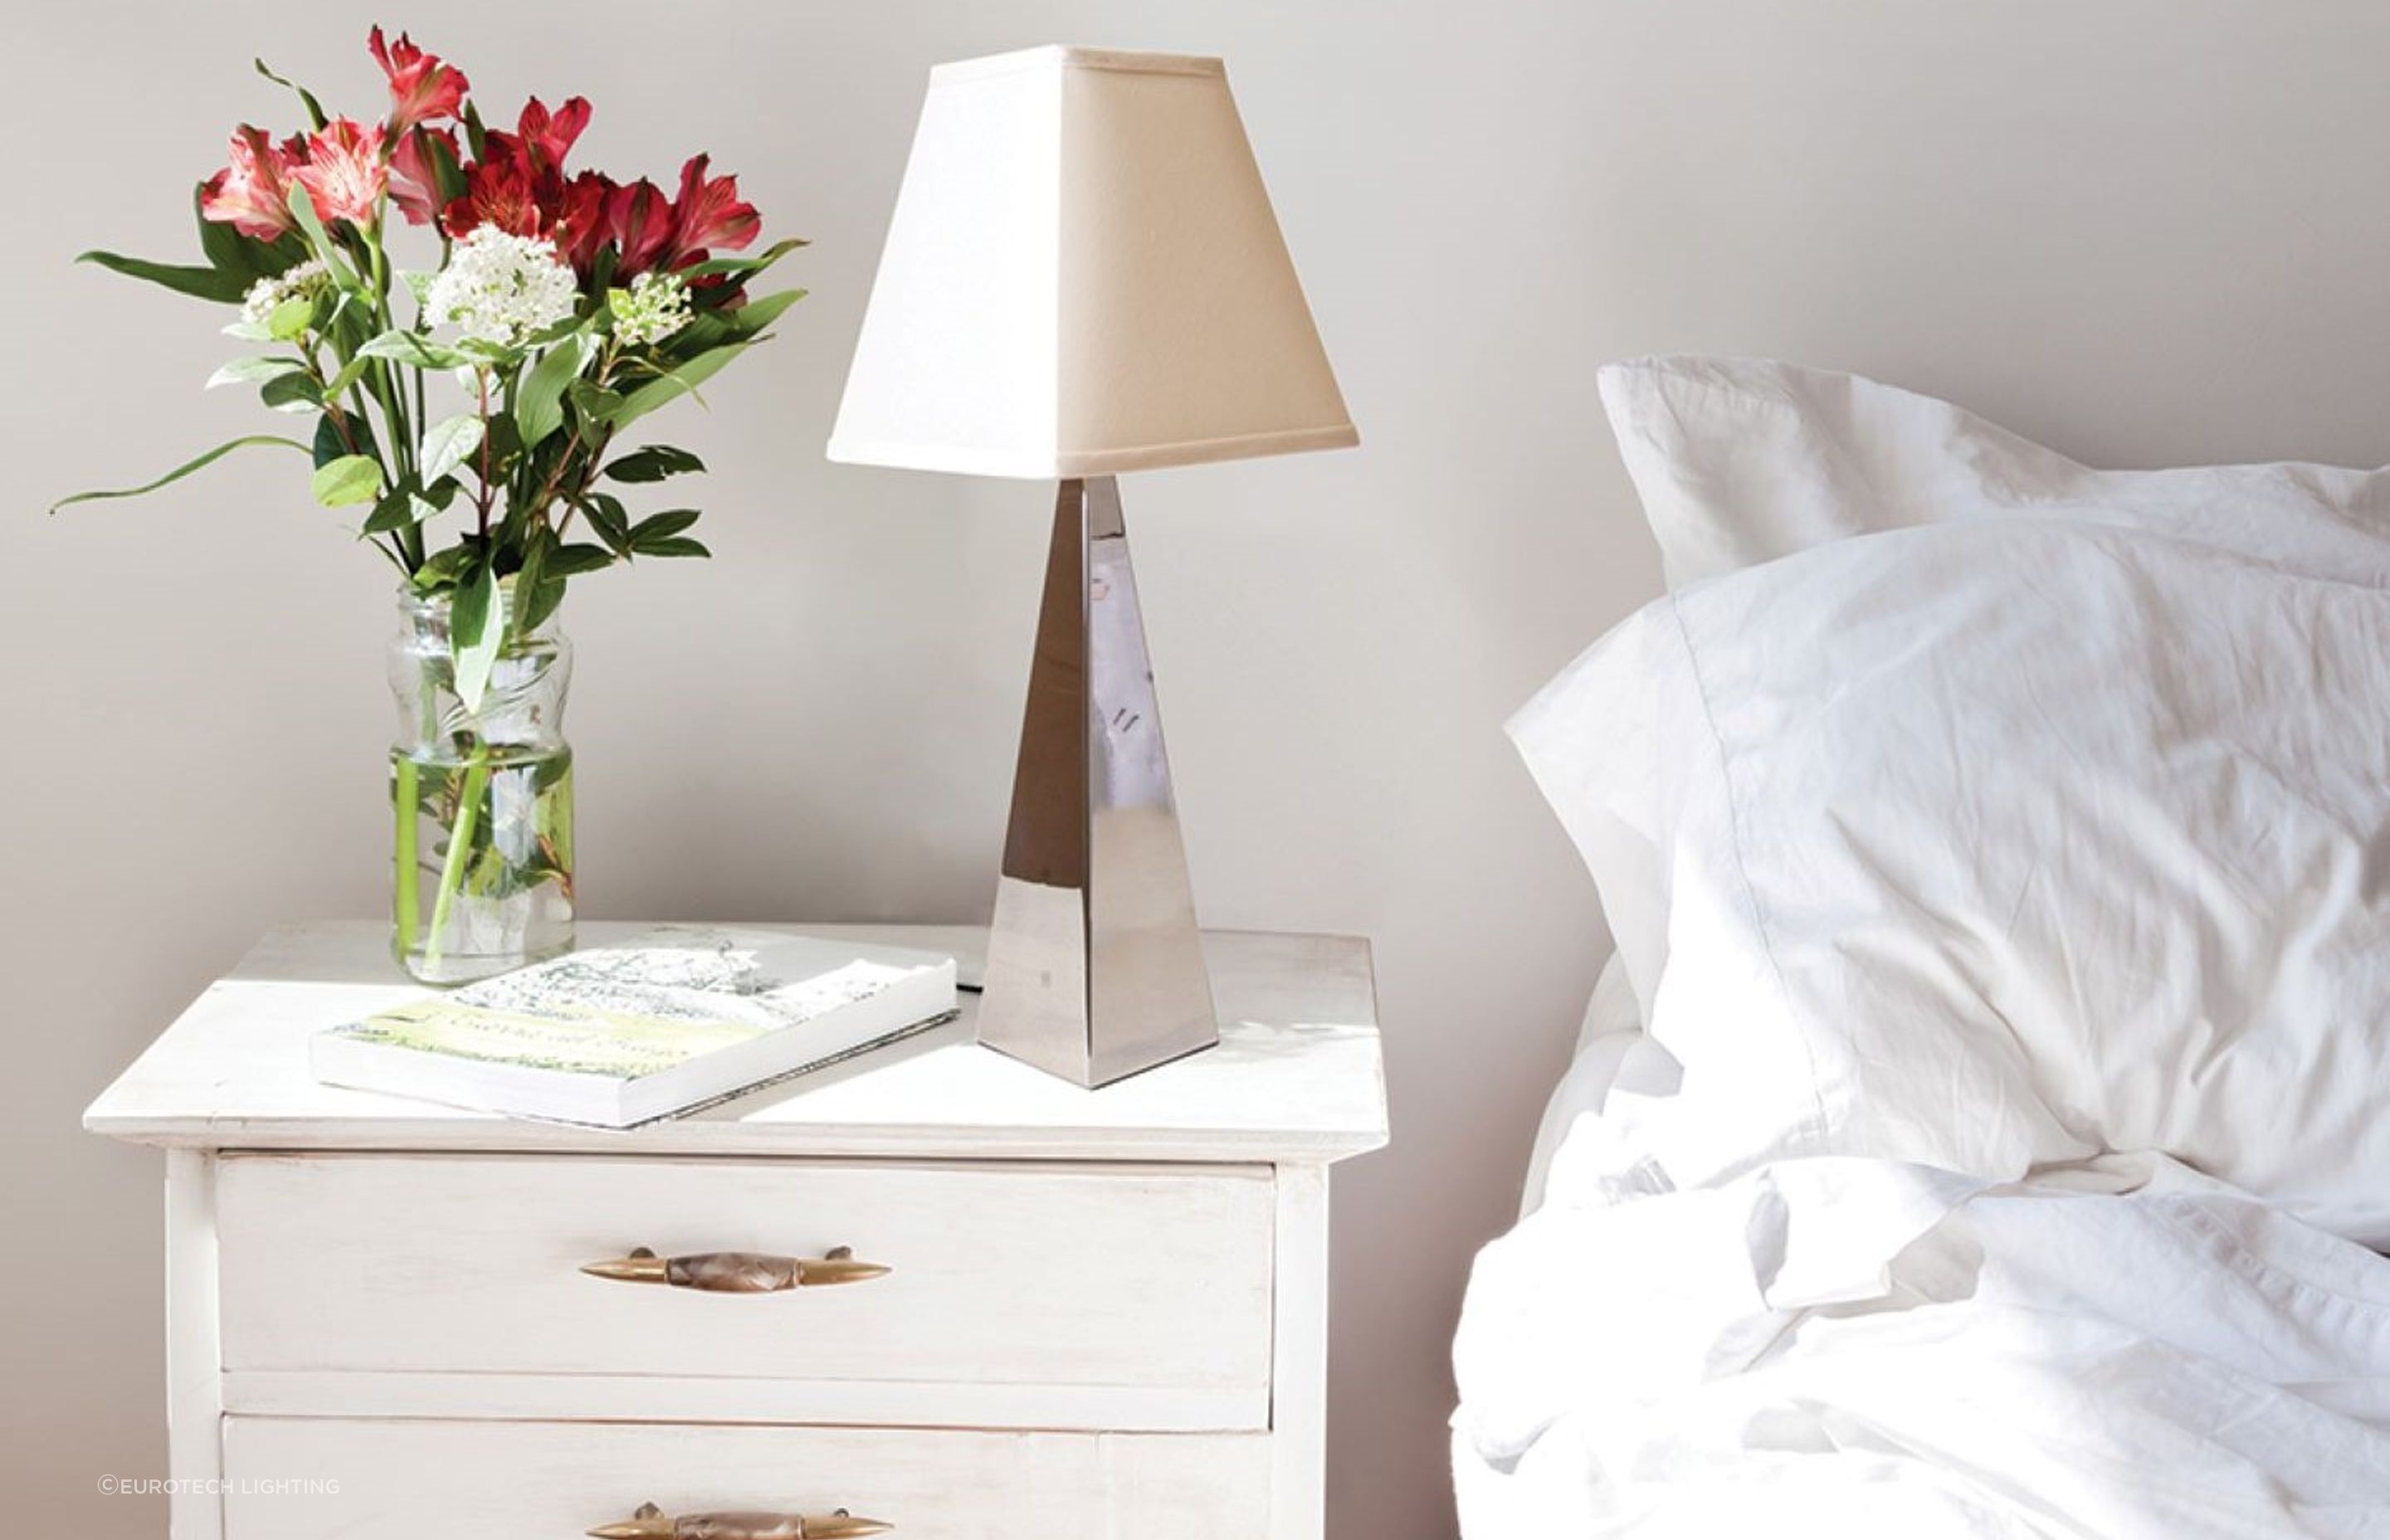 A bedside table provides a great opportunity for an exquisite table lamp to shine, seen here with the Indie Table Lamp.